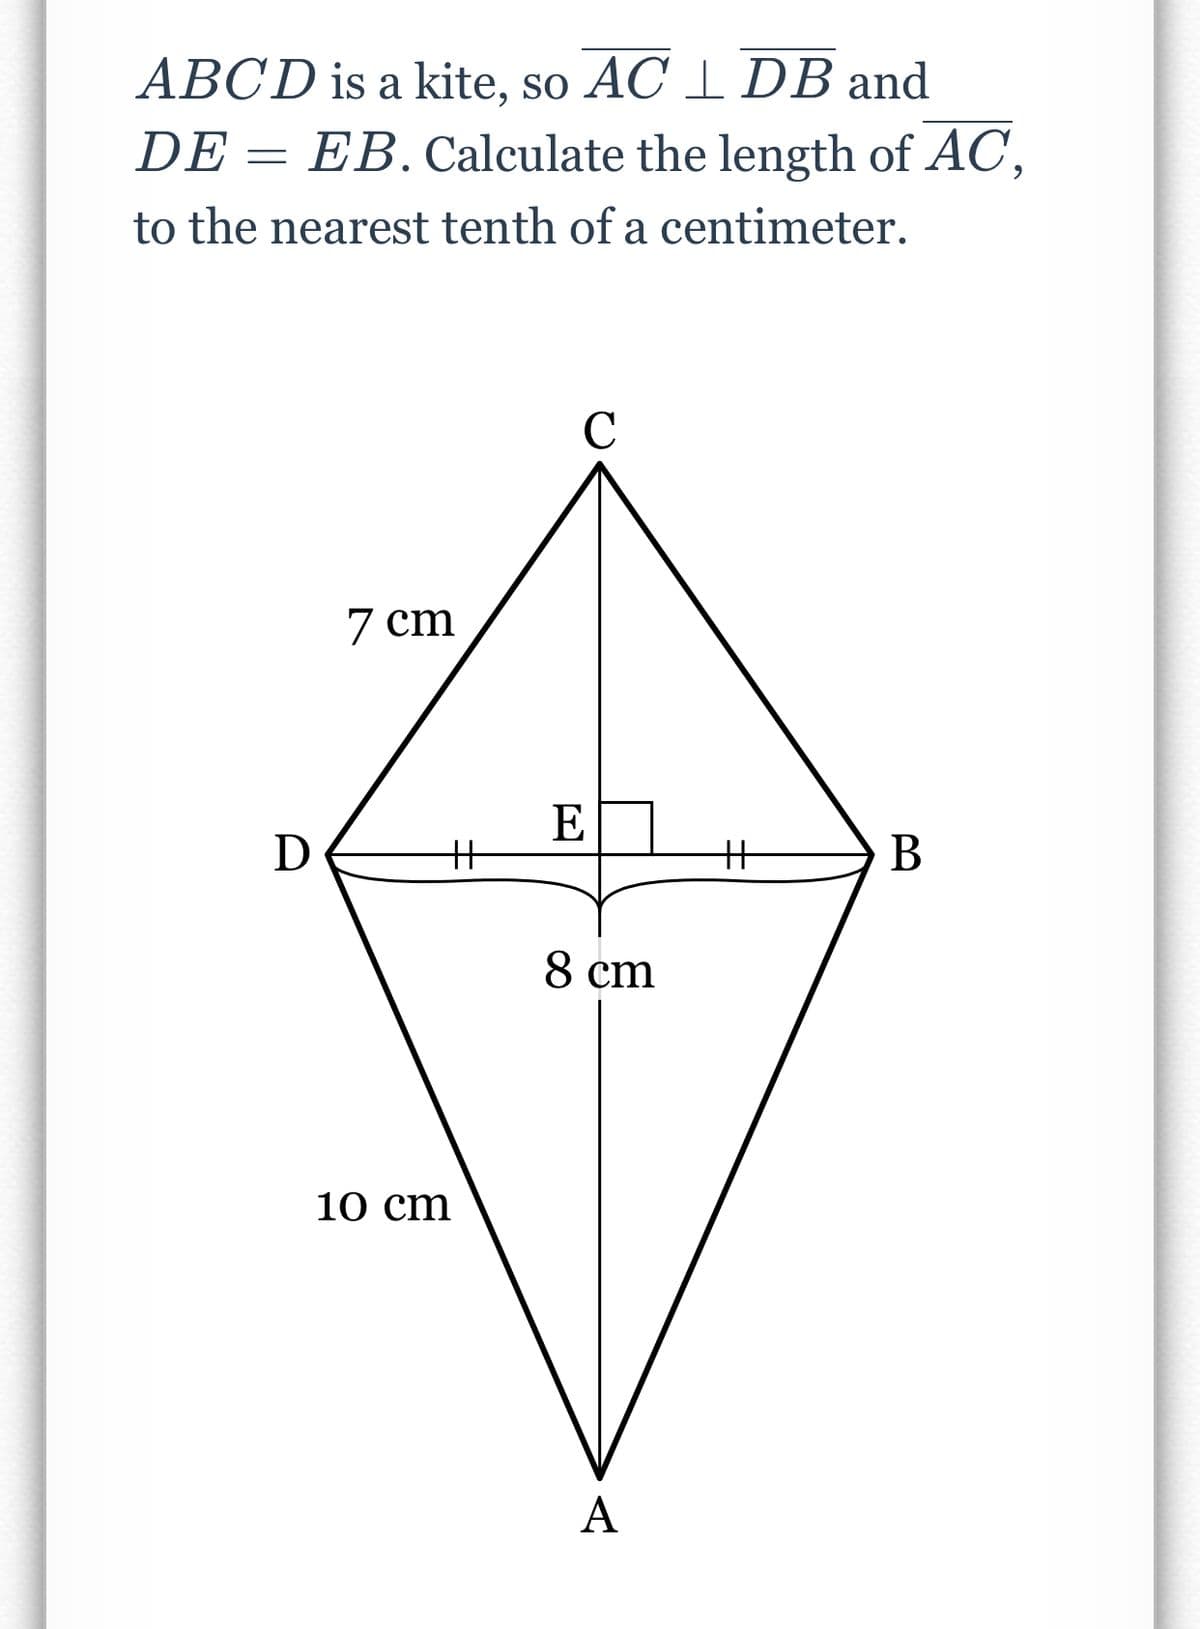 ABCD is a kite, so AC 1 DB and
DE = EB. Calculate the length of AC,
to the nearest tenth of a centimeter.
C
7 cm
E
D
%3
%3
В
8 cm
10 cm
A
